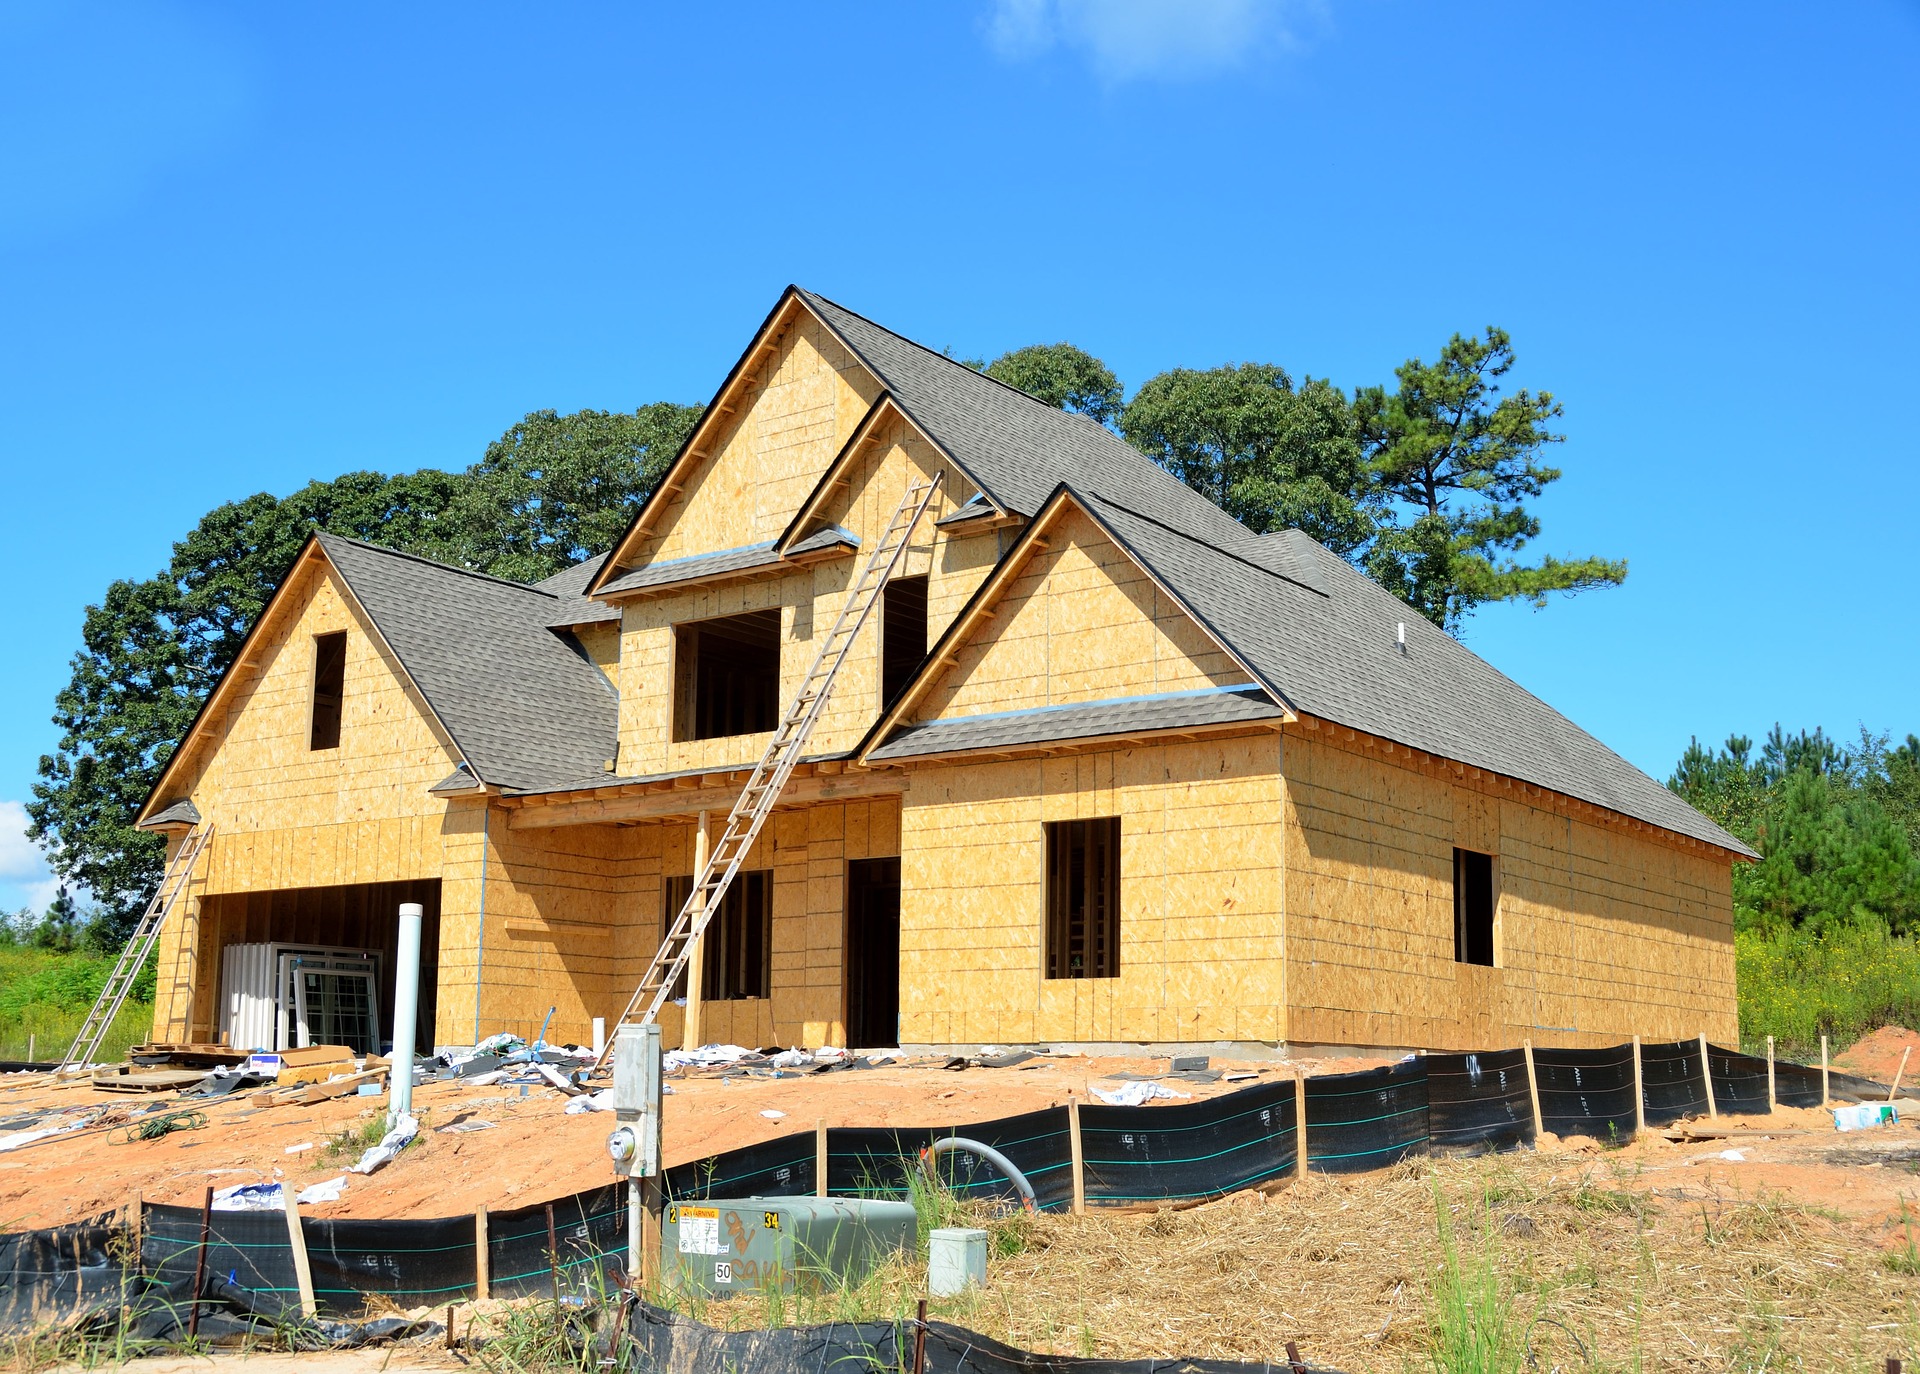 Who Are Largest U.S. Homebuilders? | South Carolina Home To Top Four Biggest Builders | Steinberg Law Firm